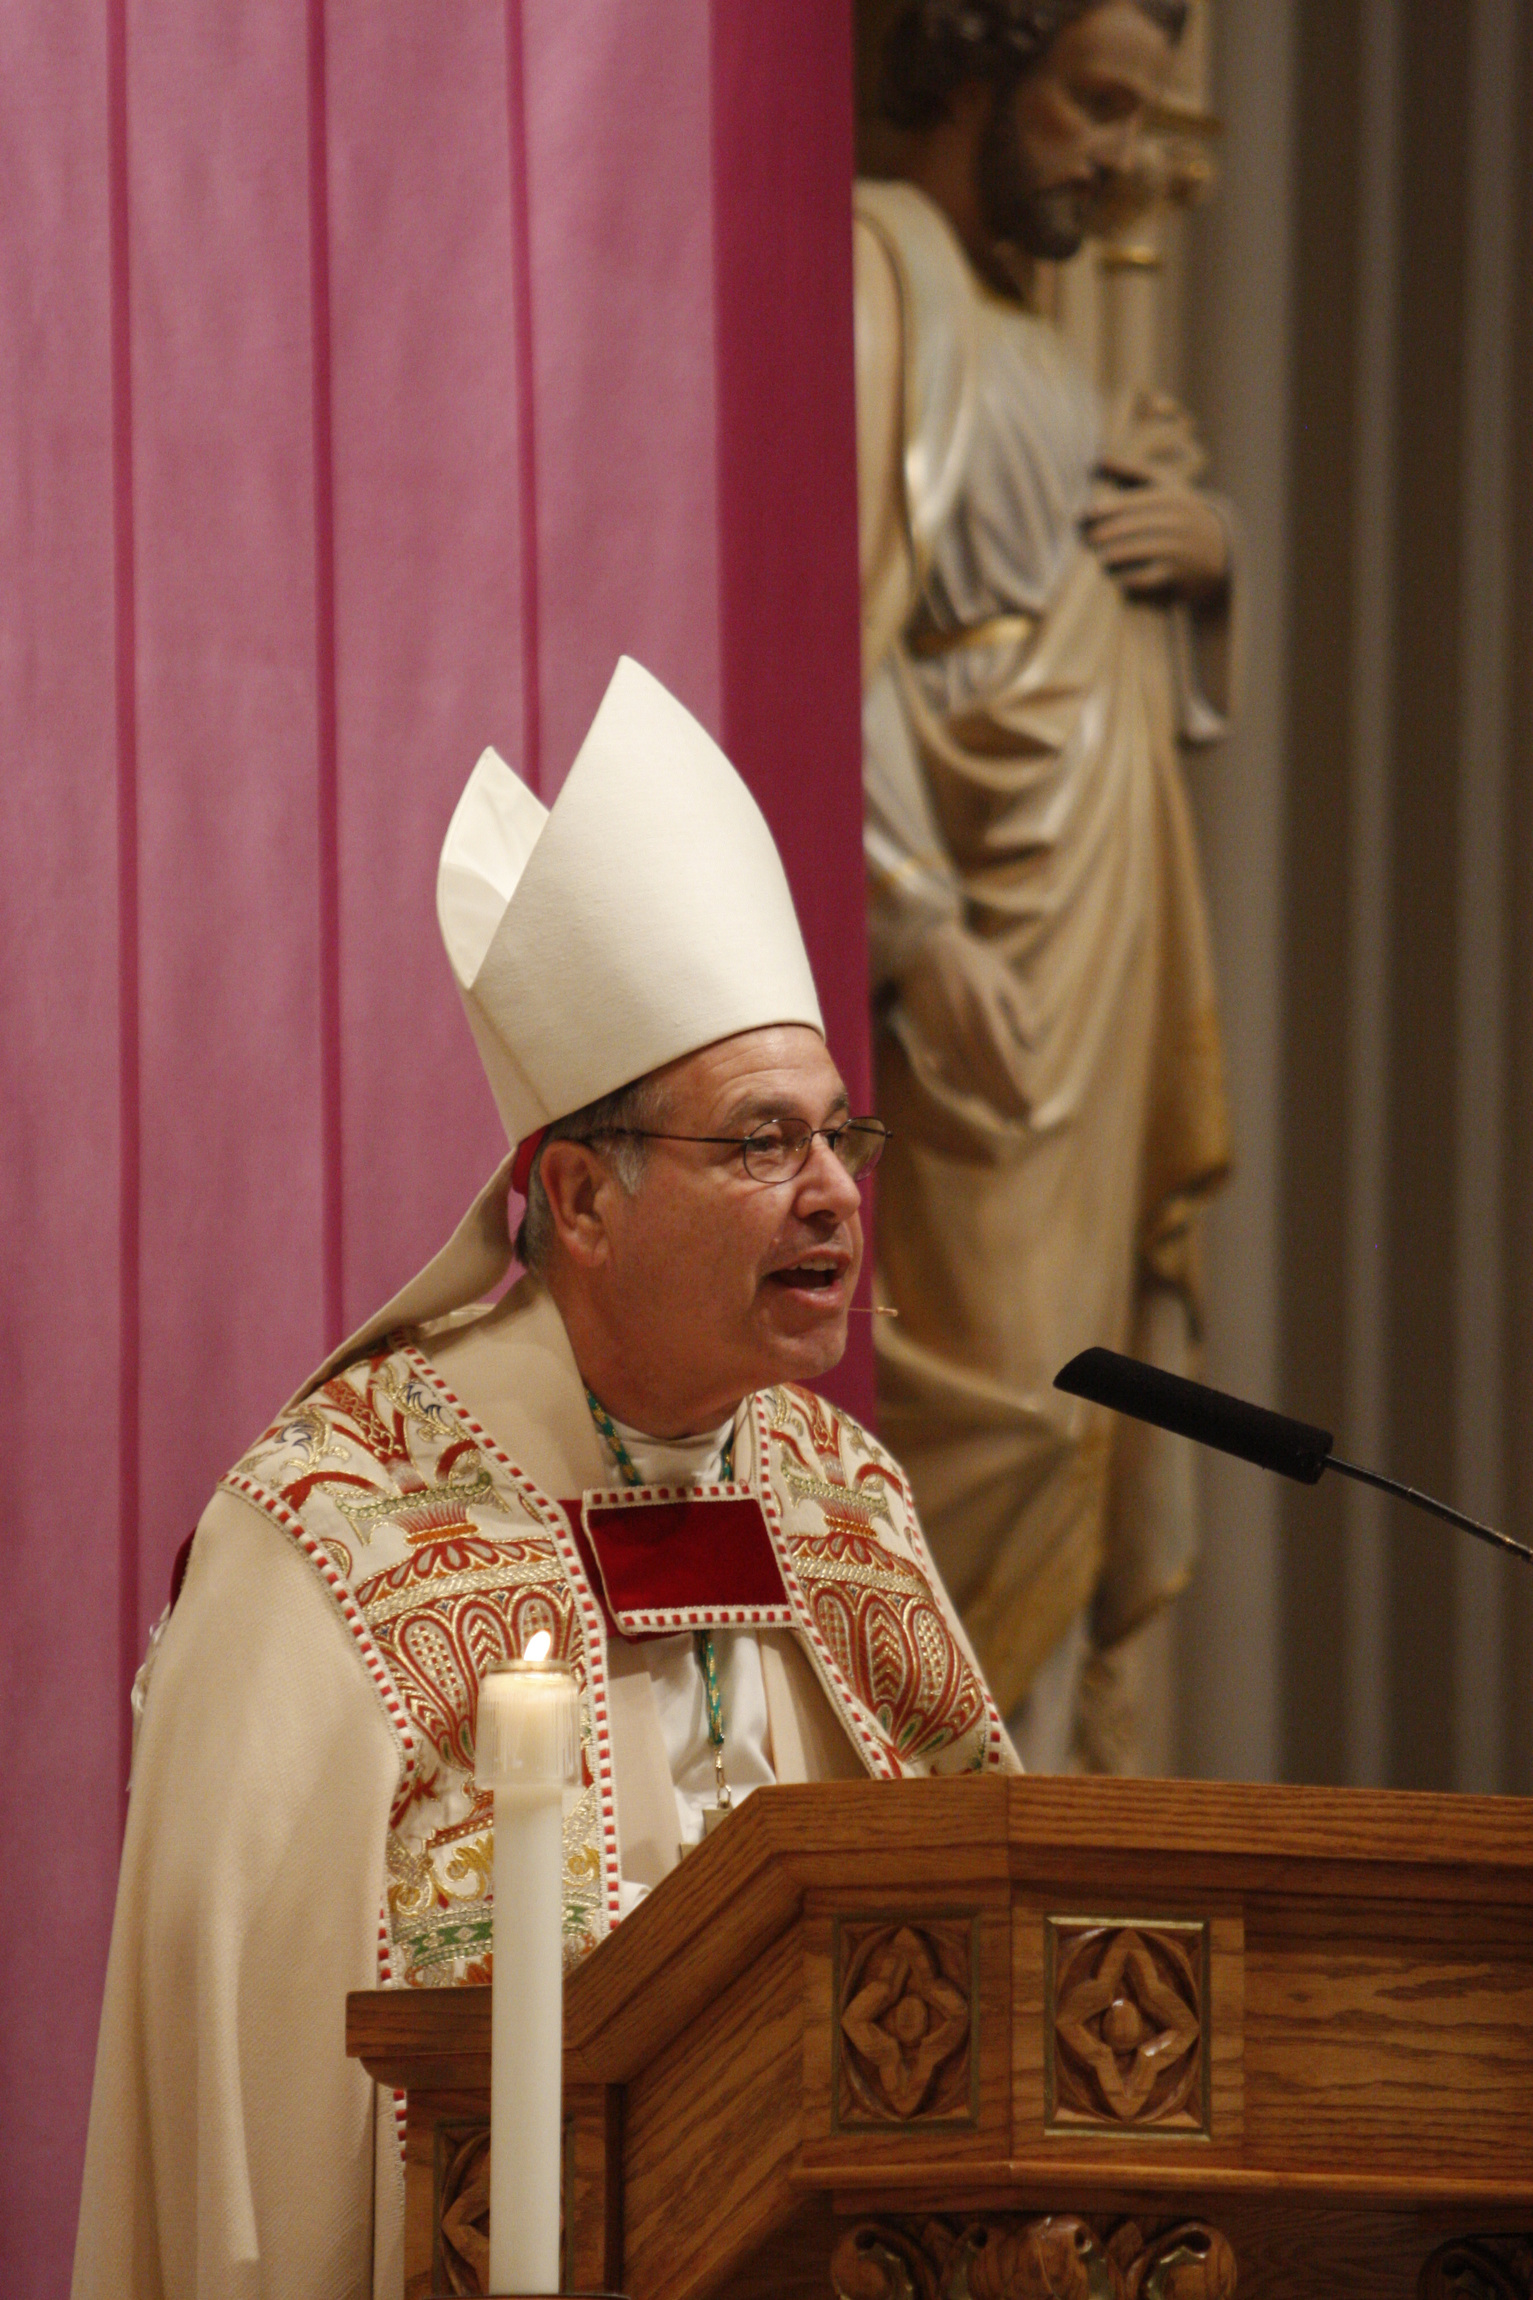 Bishop Estevez appointed to Florida diocese - Today's Catholic